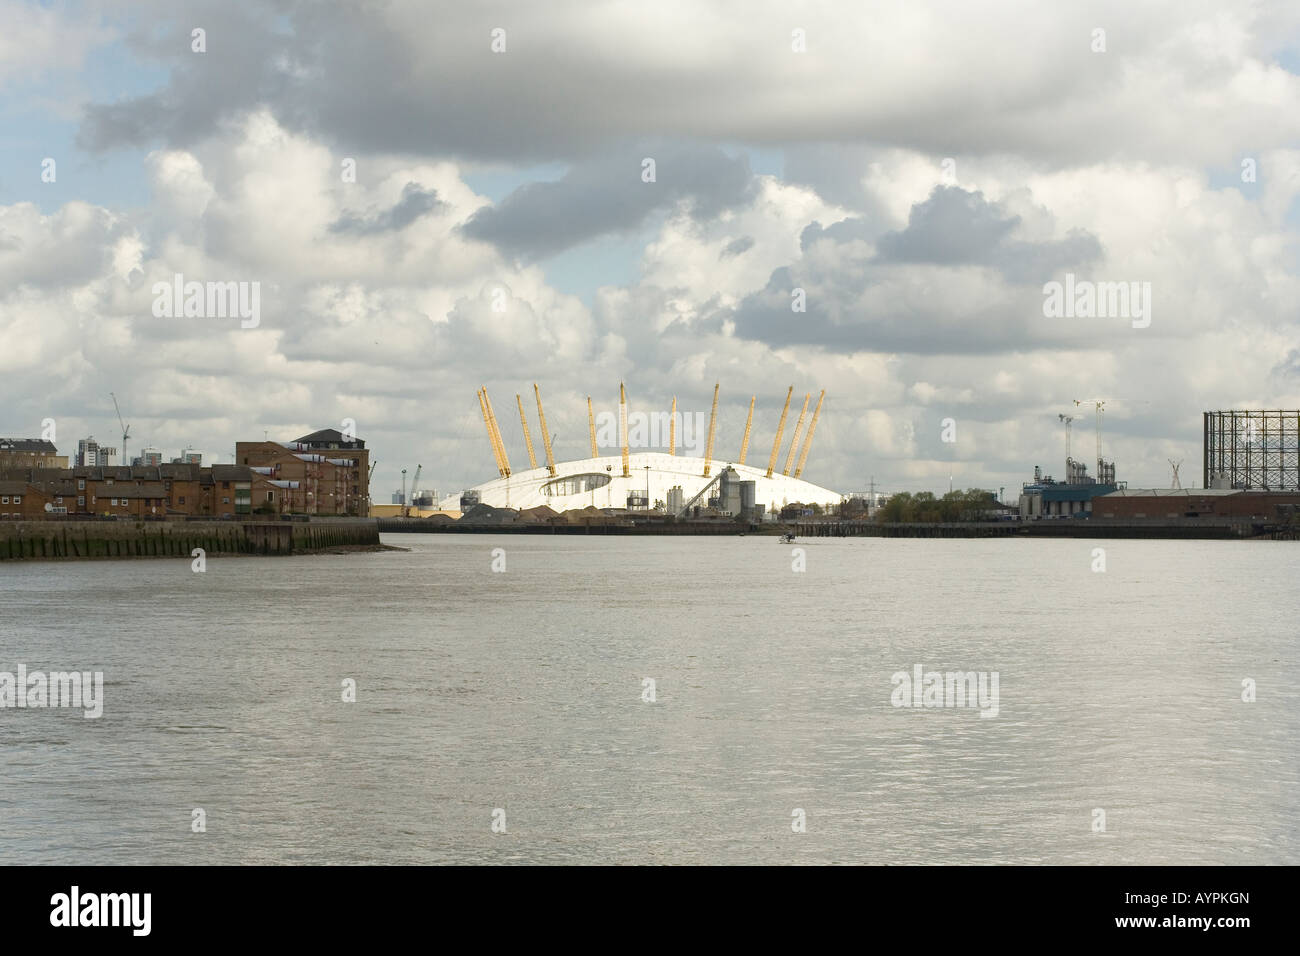 The O2 arena previously called the millennium dome, Greenwich, London. Stock Photo